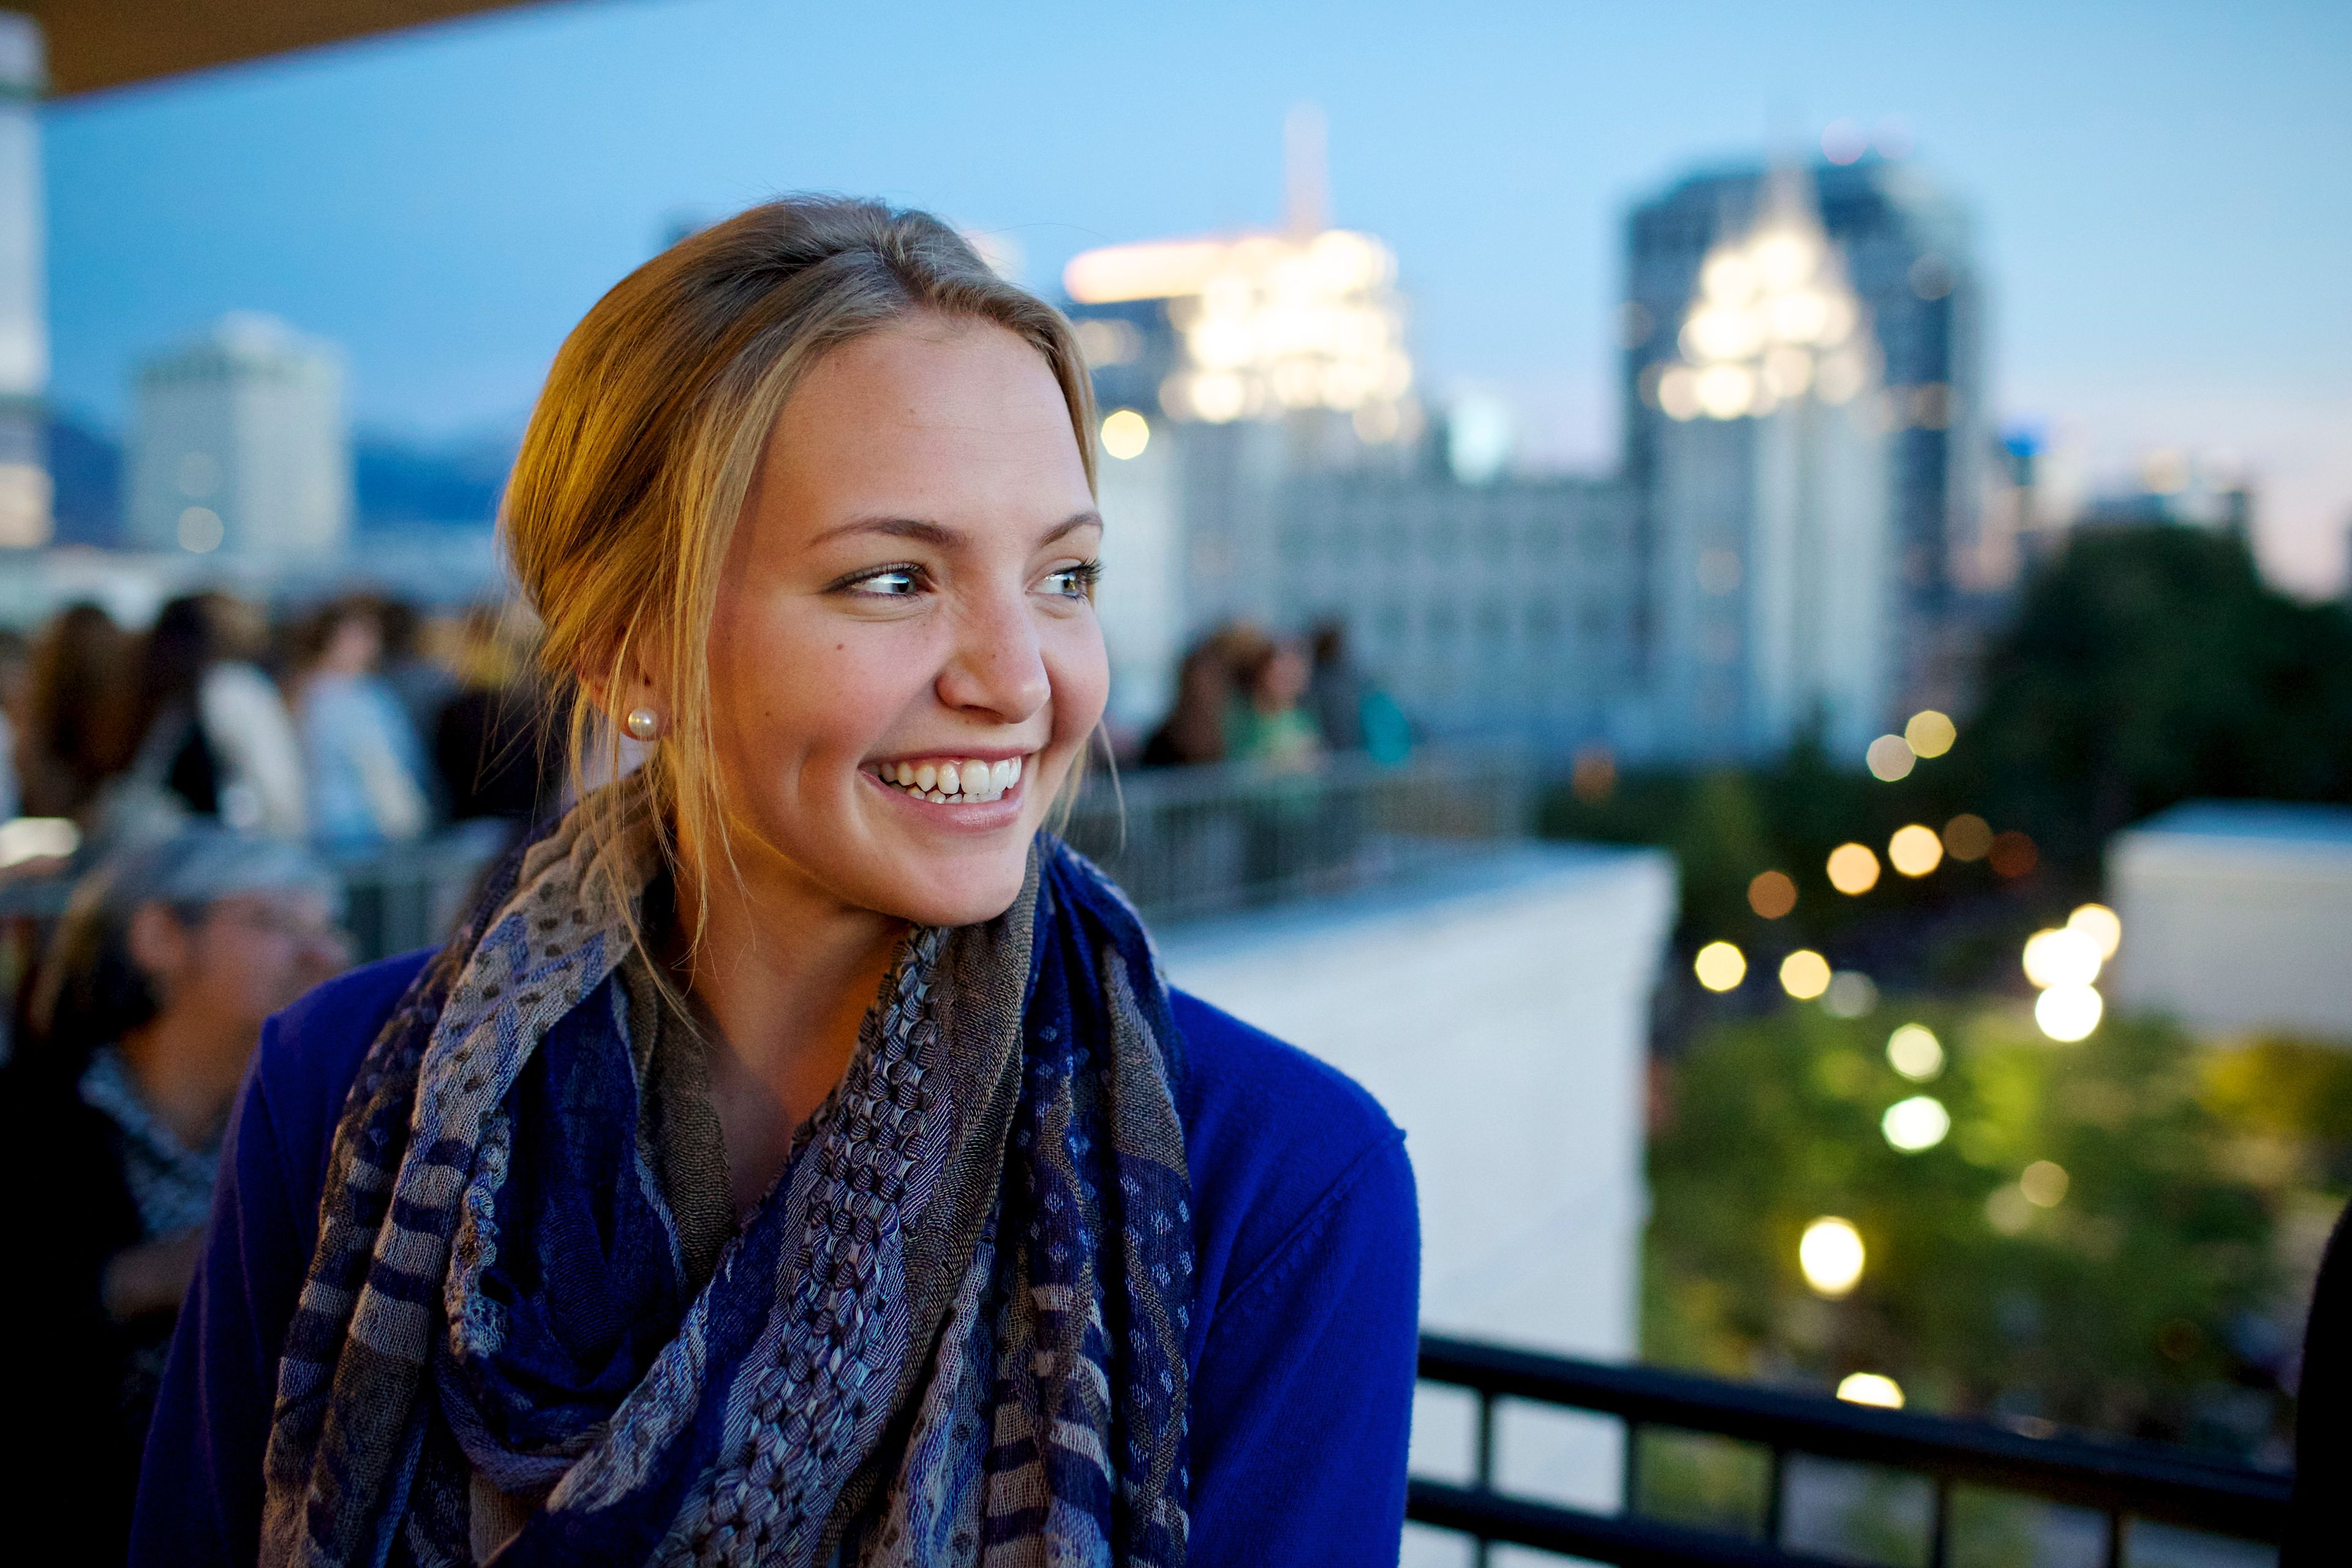 A young woman standing on a balcony with the Salt Lake Temple in the distance.